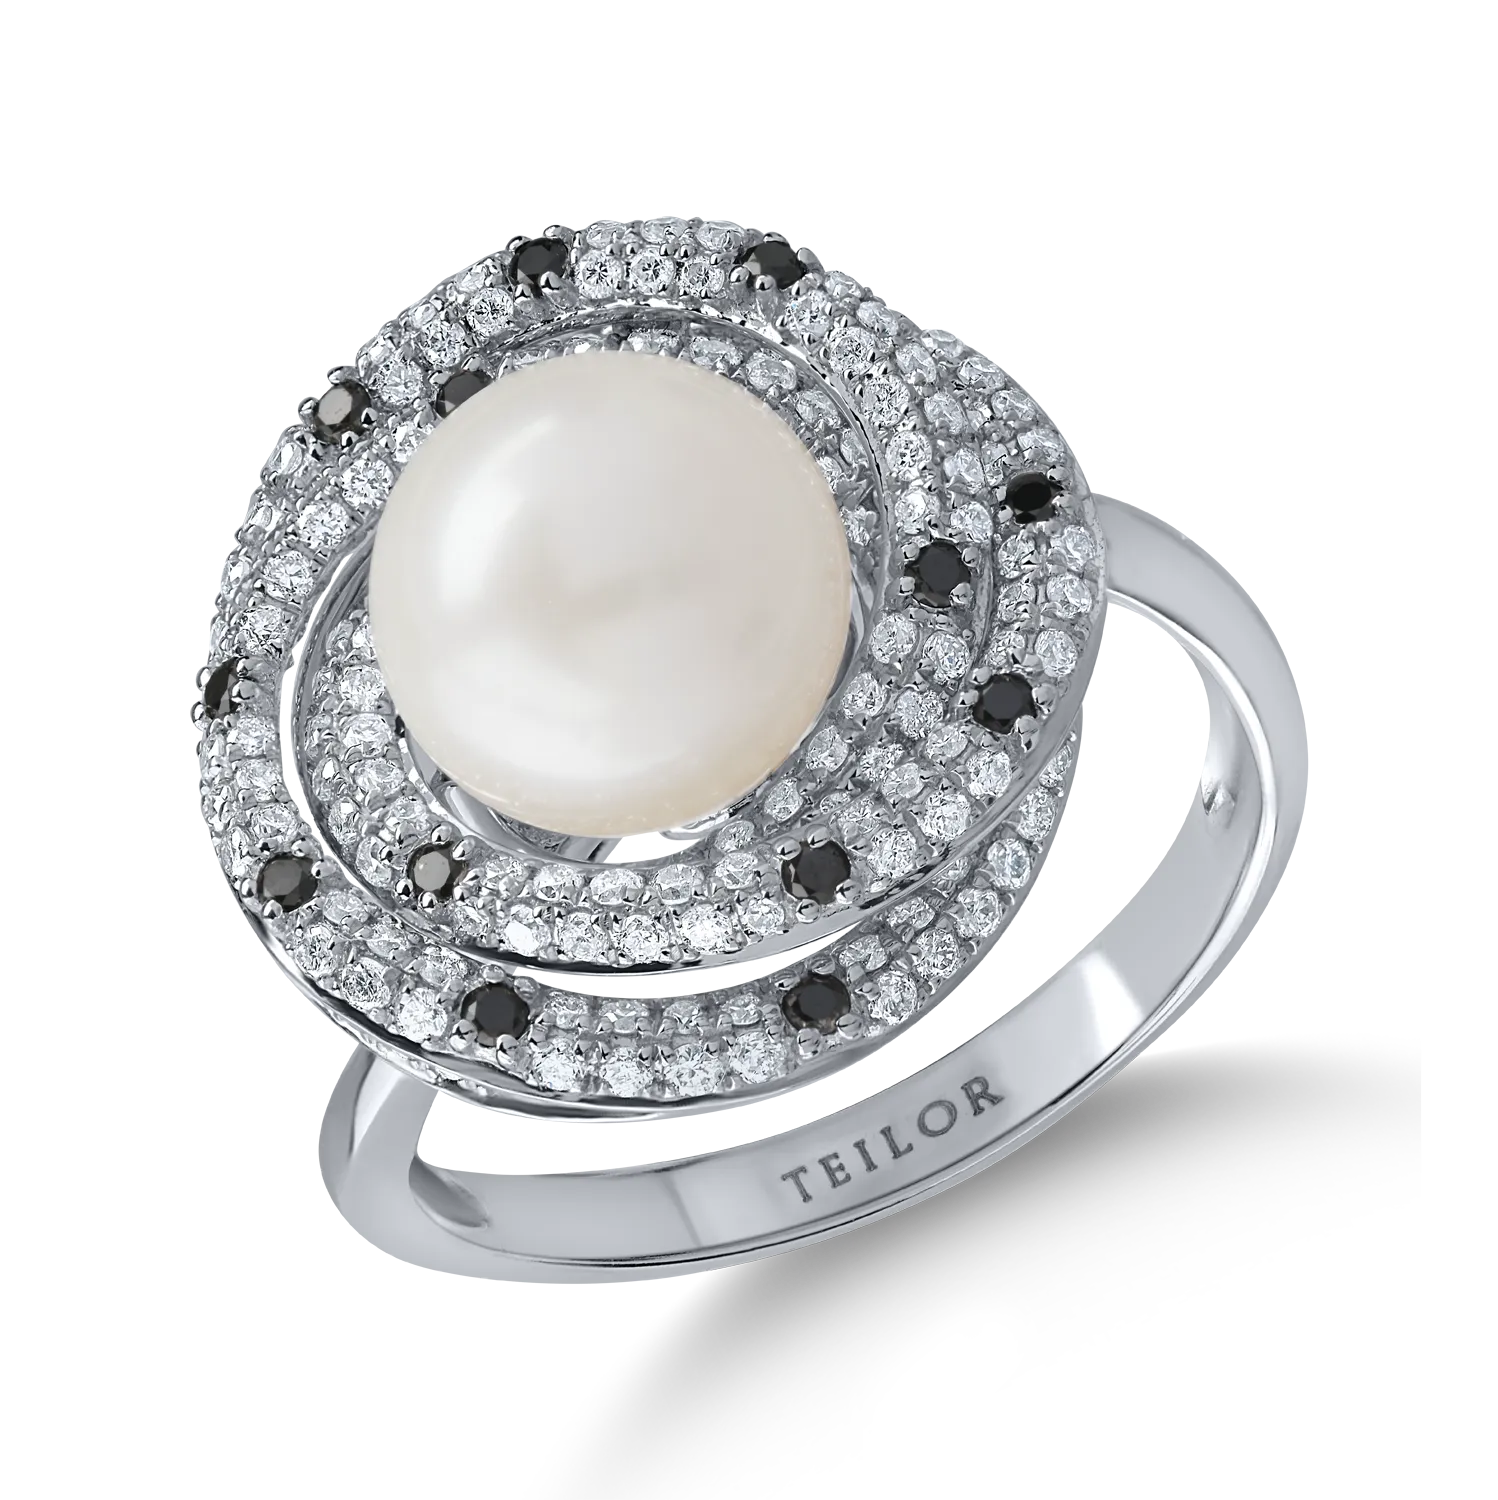 White gold ring with 5.2ct fresh water pearl and 0.7ct diamonds